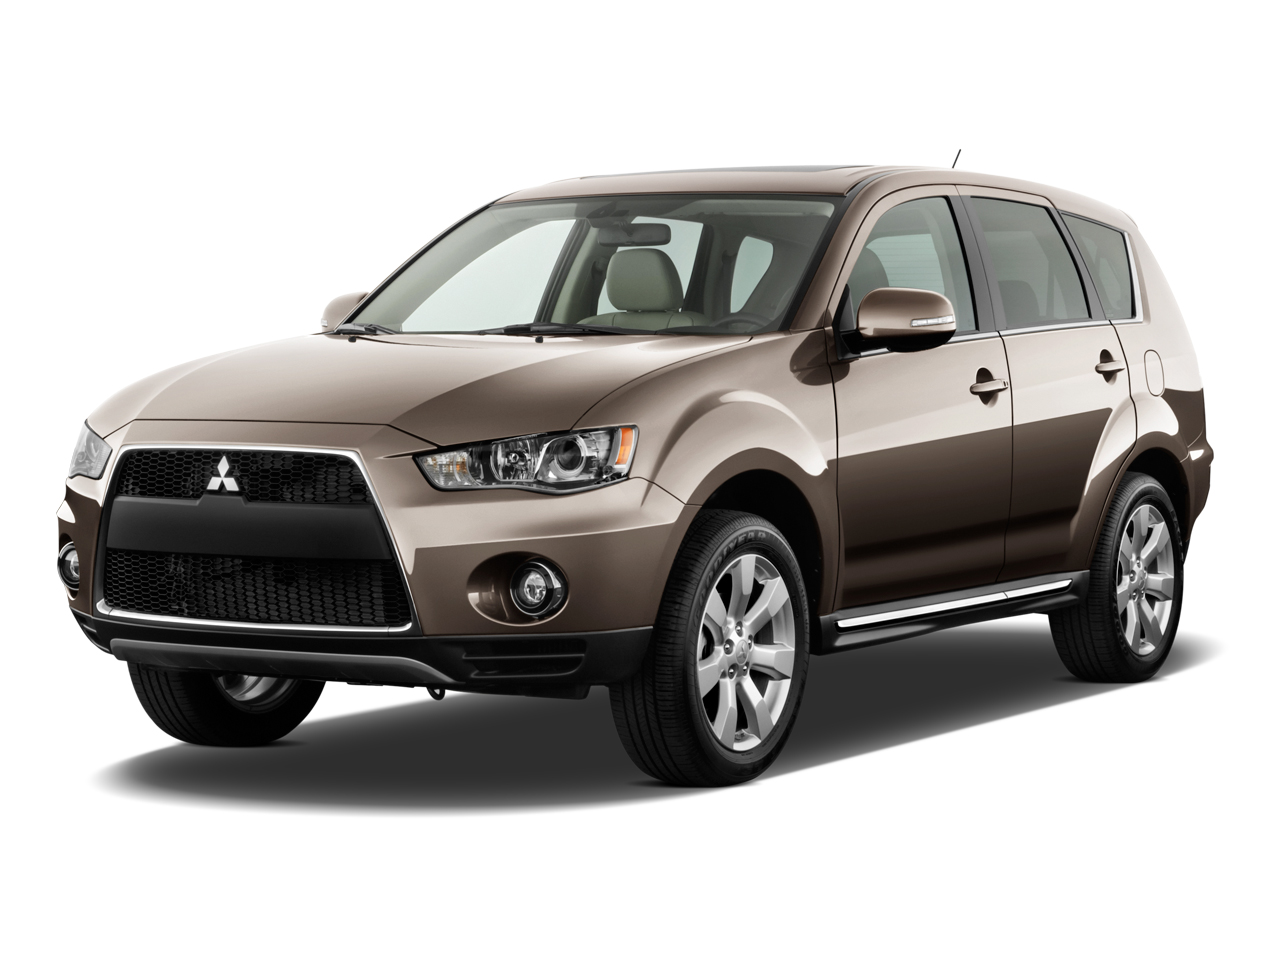 2011 Mitsubishi Outlander Review, Ratings, Specs, Prices